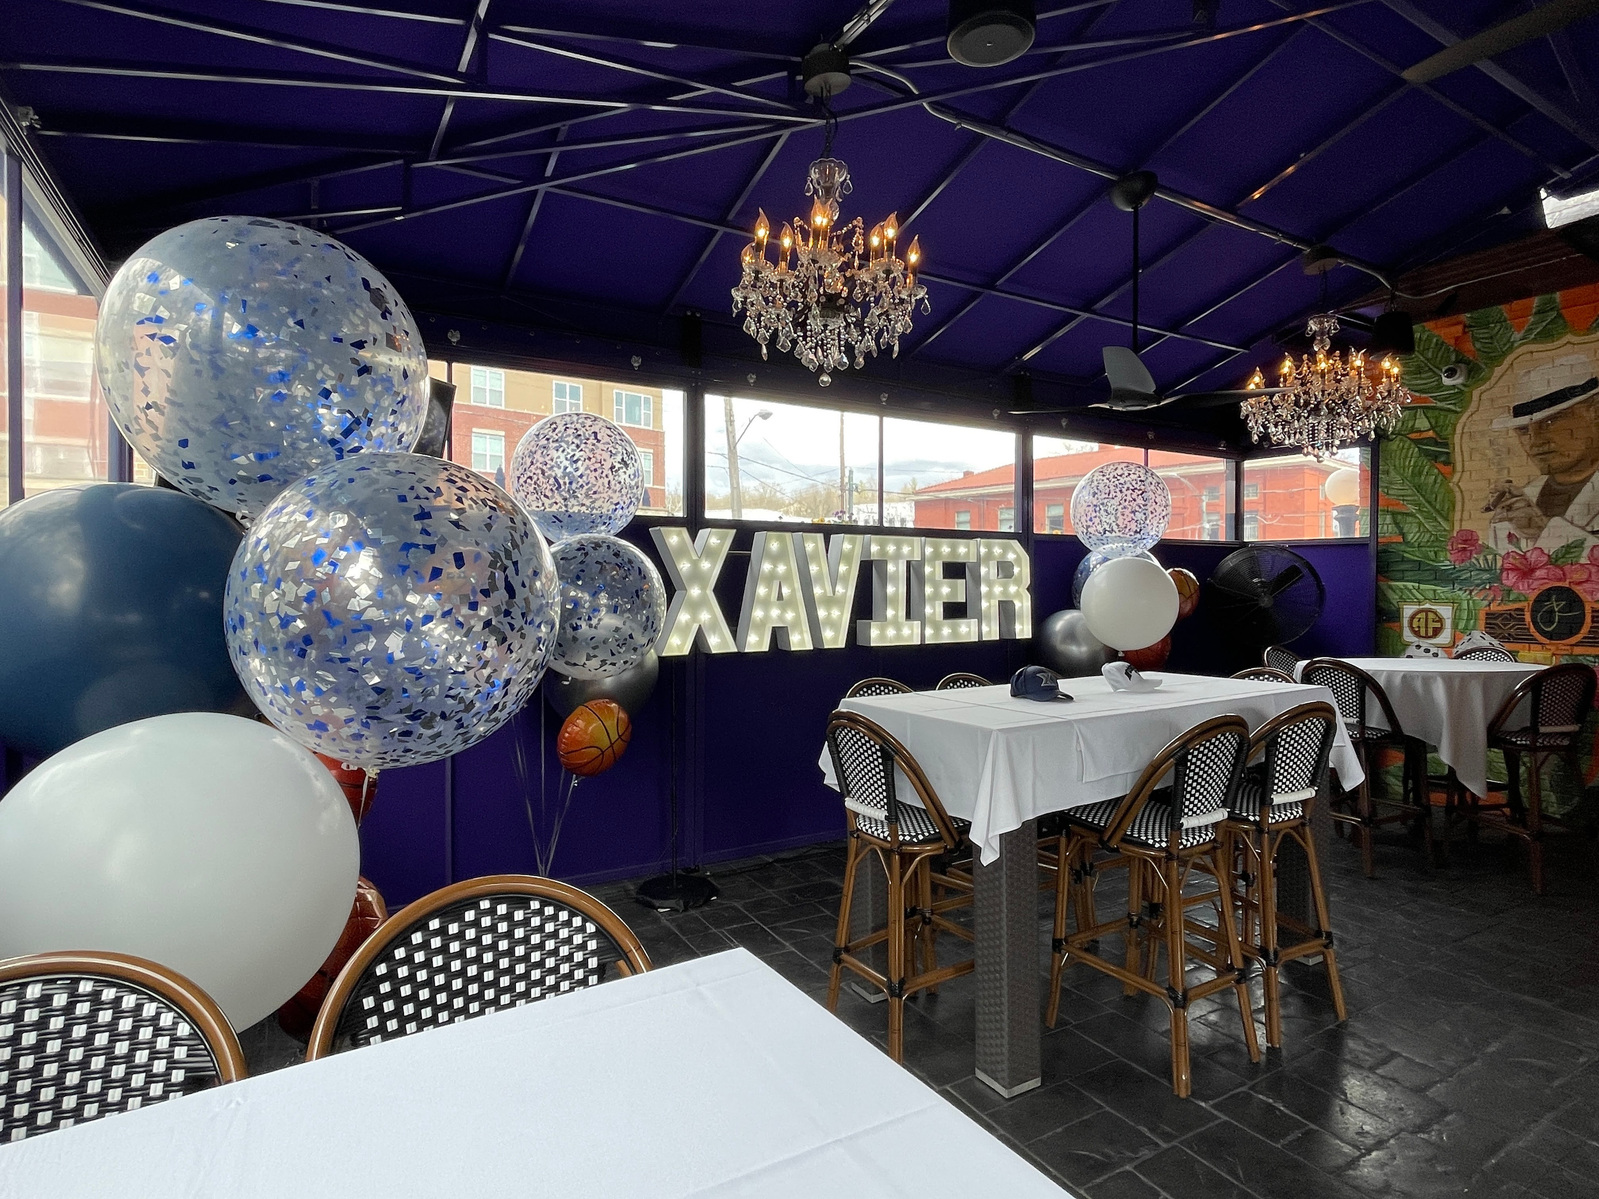 Under a purple outdoor event tent are light up marquee letters with helium balloon bouquets of blue white and clear confetti balloons